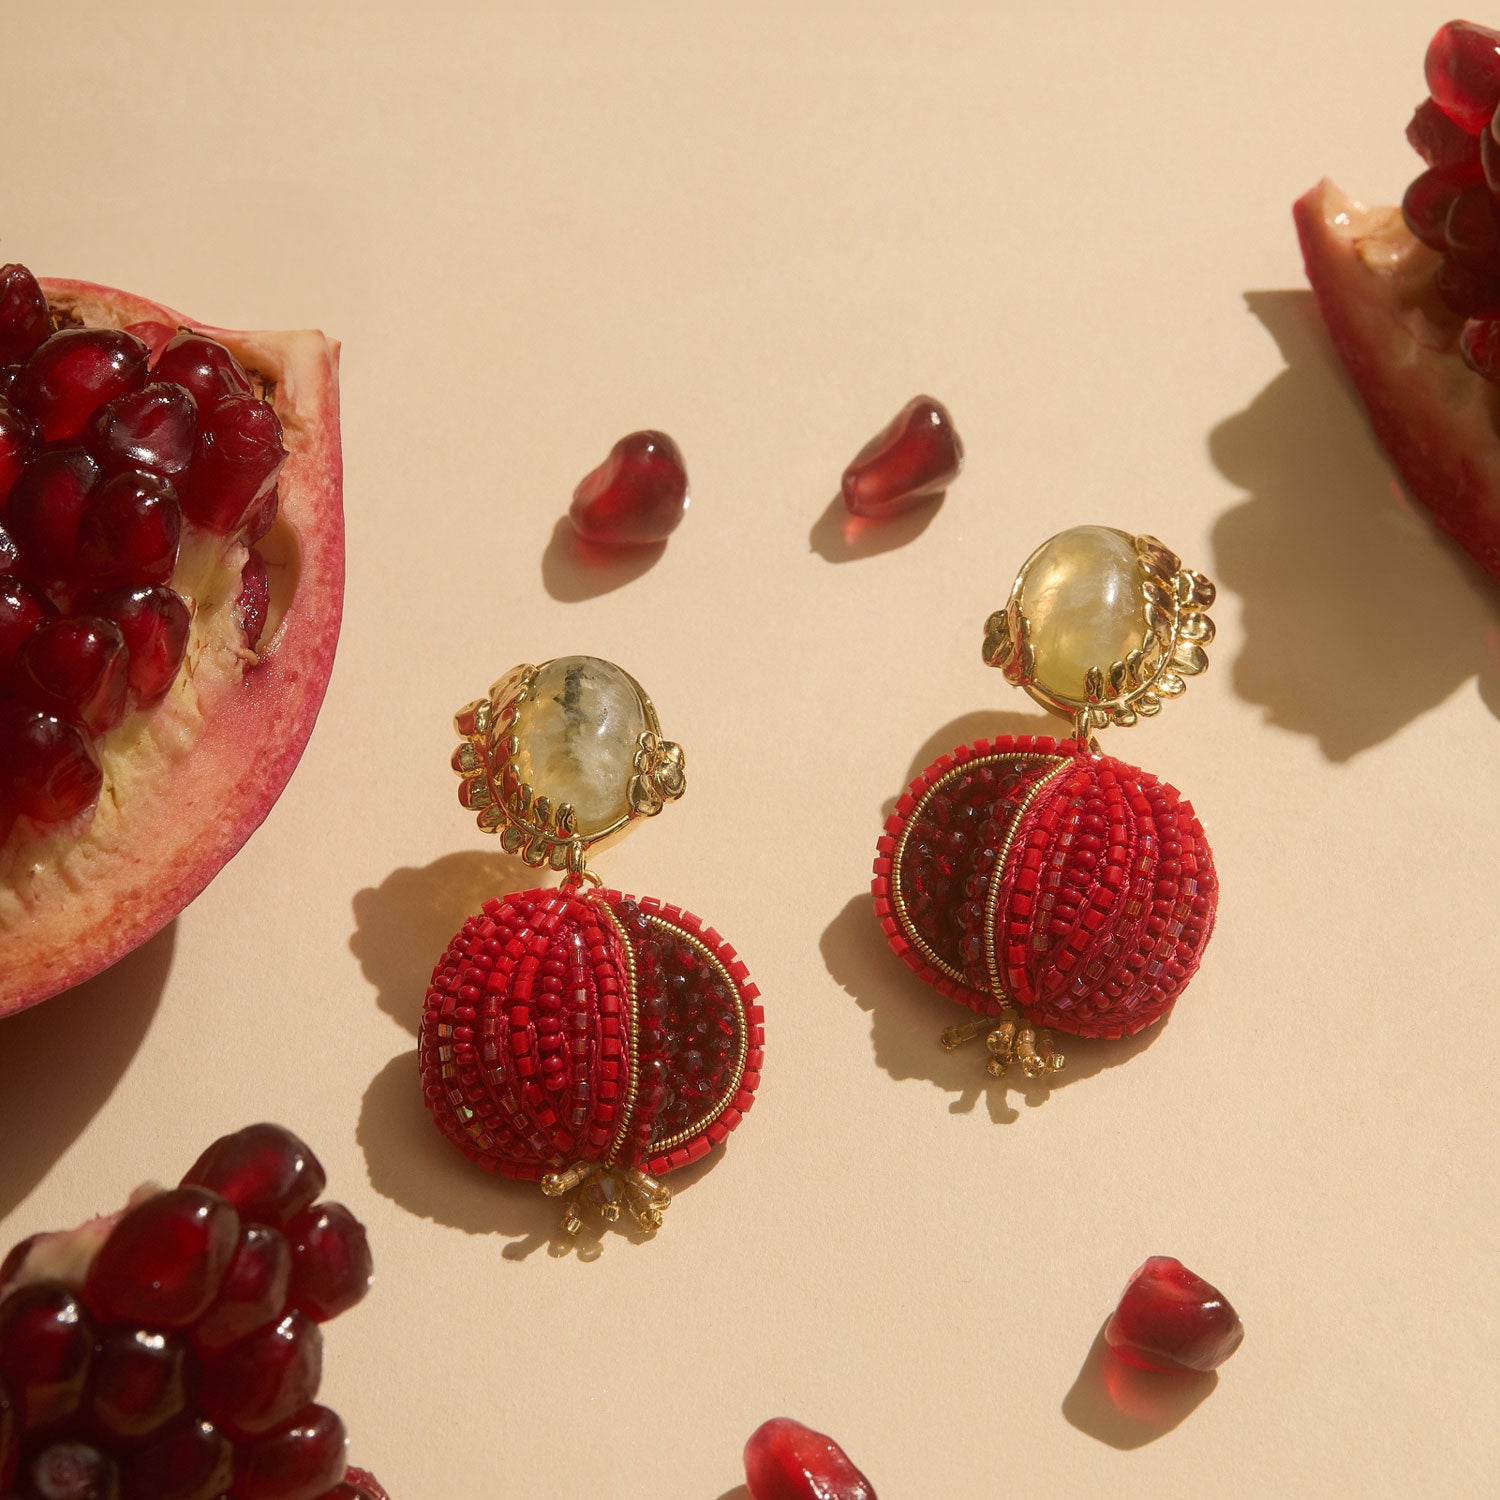 Pomegranate Beaded Double Drop Earrings Staged on Tan Background with Pomegranate Seeds